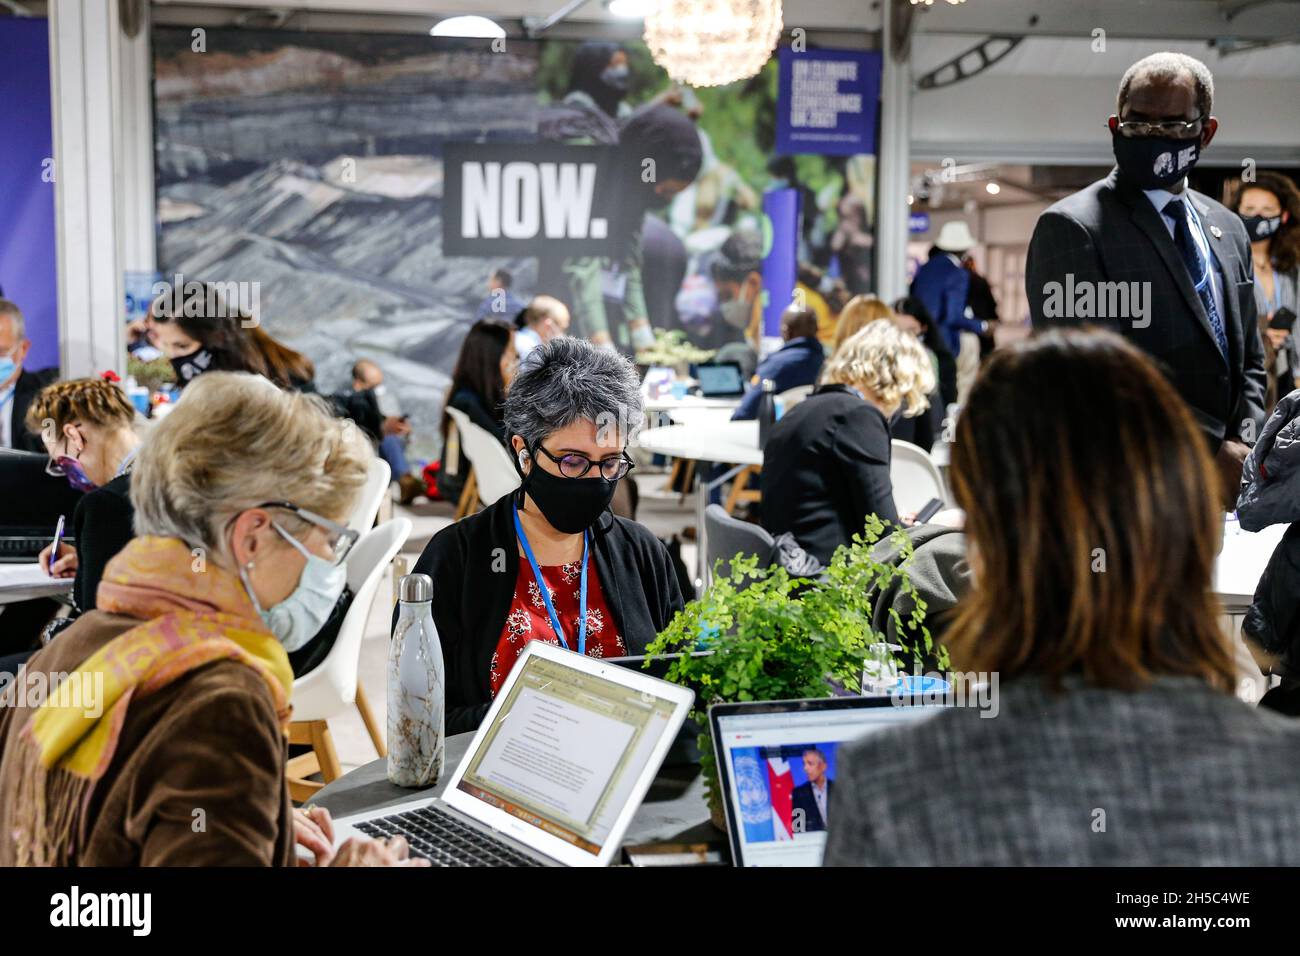 Glasgow, UK. 08th Nov, 2021. Participants work in a common area during the eighth day of the COP26 UN Climate Change Conference, held by UNFCCC inside the COP26 venue - Scottish Event Campus in Glasgow, Scotland on November 8, 2021. COP26, running from October 31 to November to 12 in Glasgow, is the most significant climate conference since the 2015 Paris summit as the nations are expected to set new greenhouse gas emission targets in order to slow the global warming, as well as firming up other key commitments. (Photo by Dominika Zarzycka/Sipa USA) Credit: Sipa USA/Alamy Live News Stock Photo